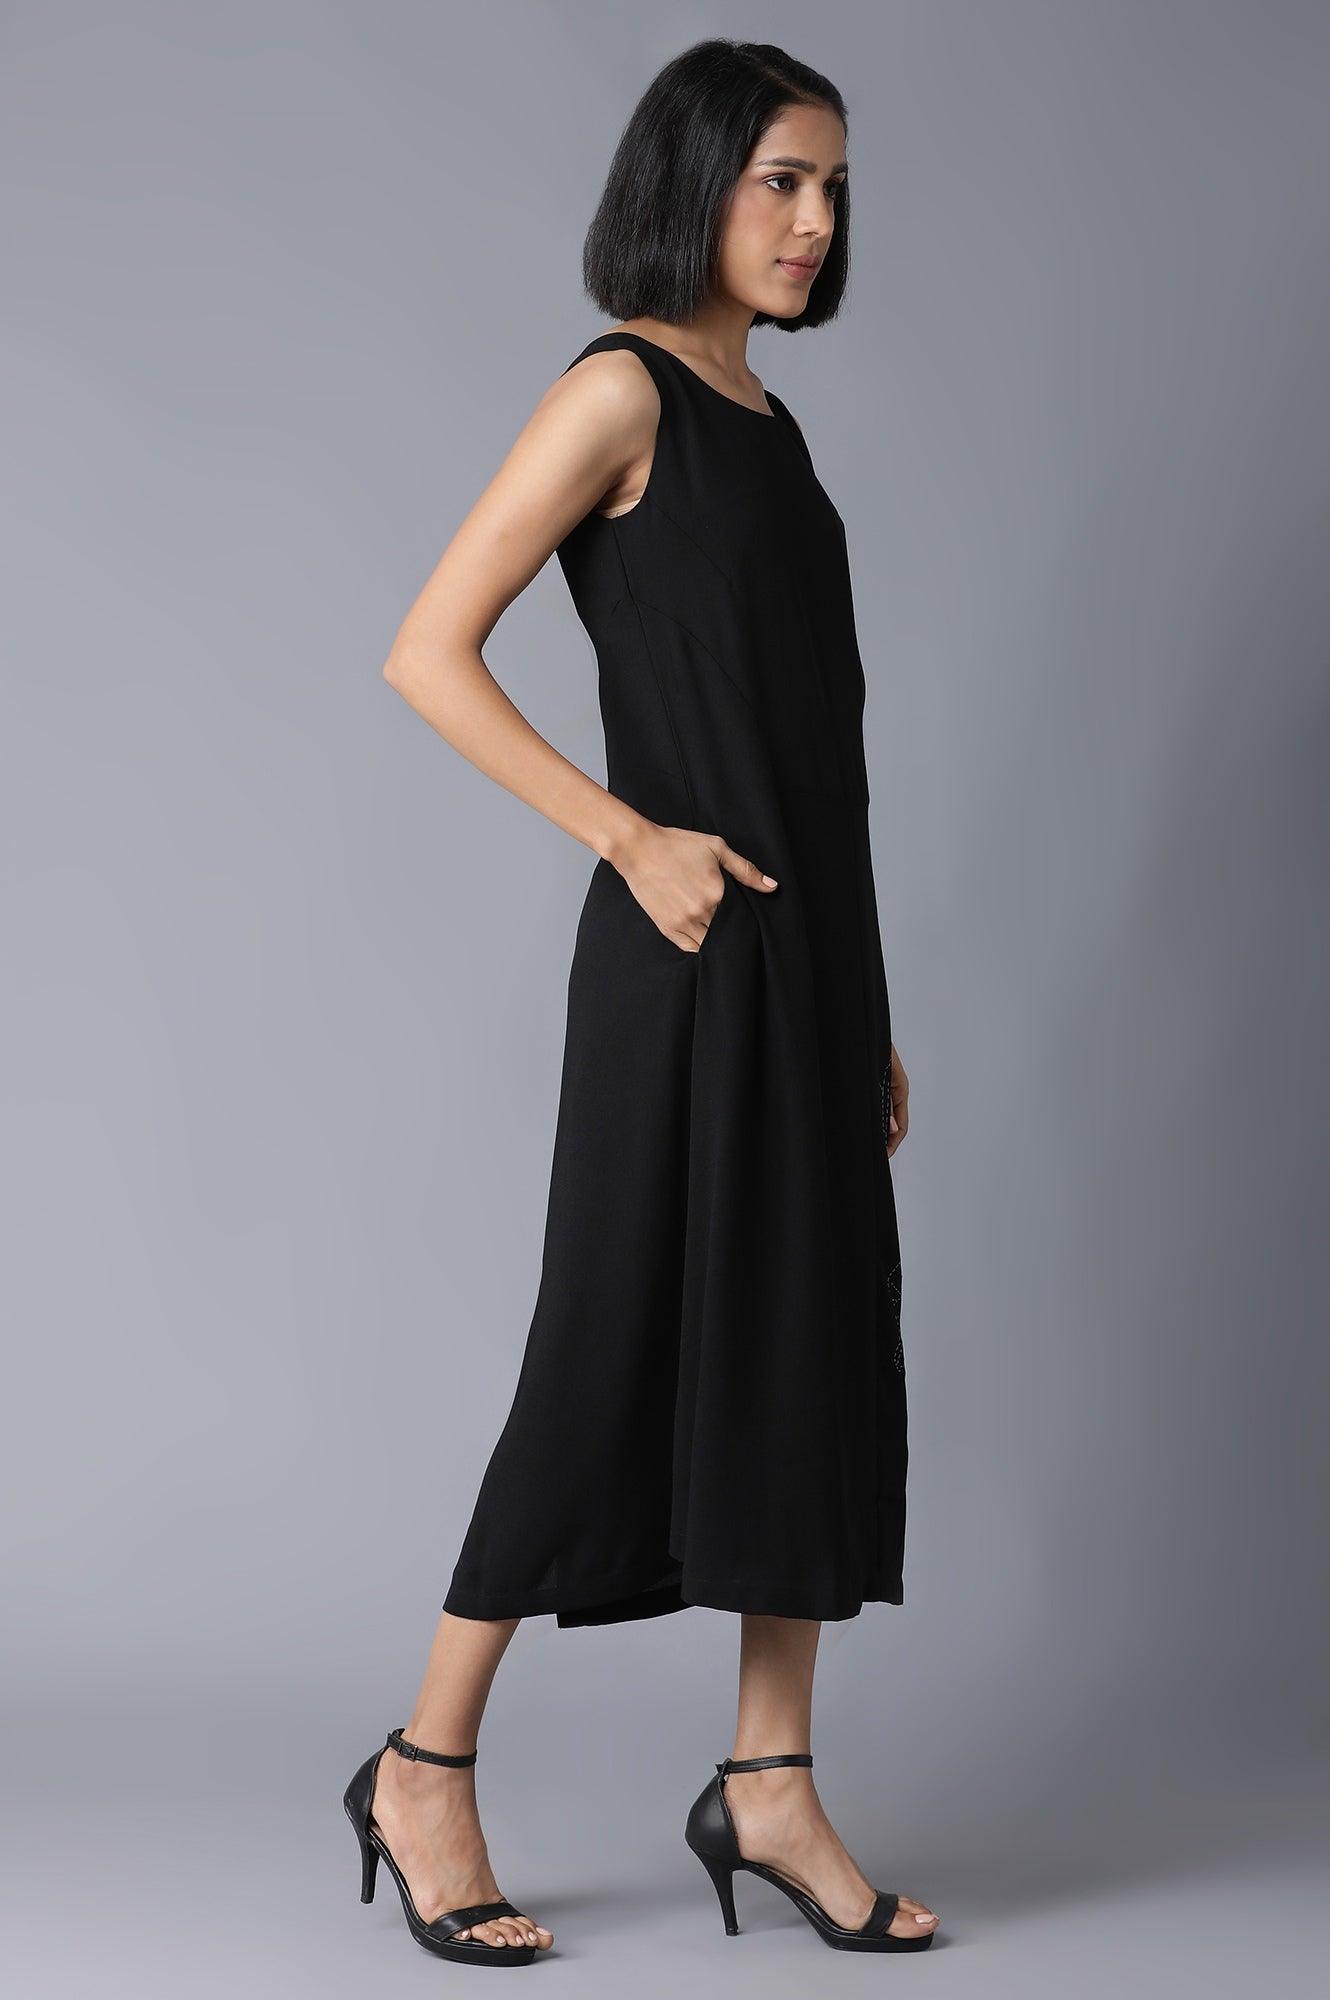 Black Sleeveless Embroidered Dress In Round Neck - wforwoman